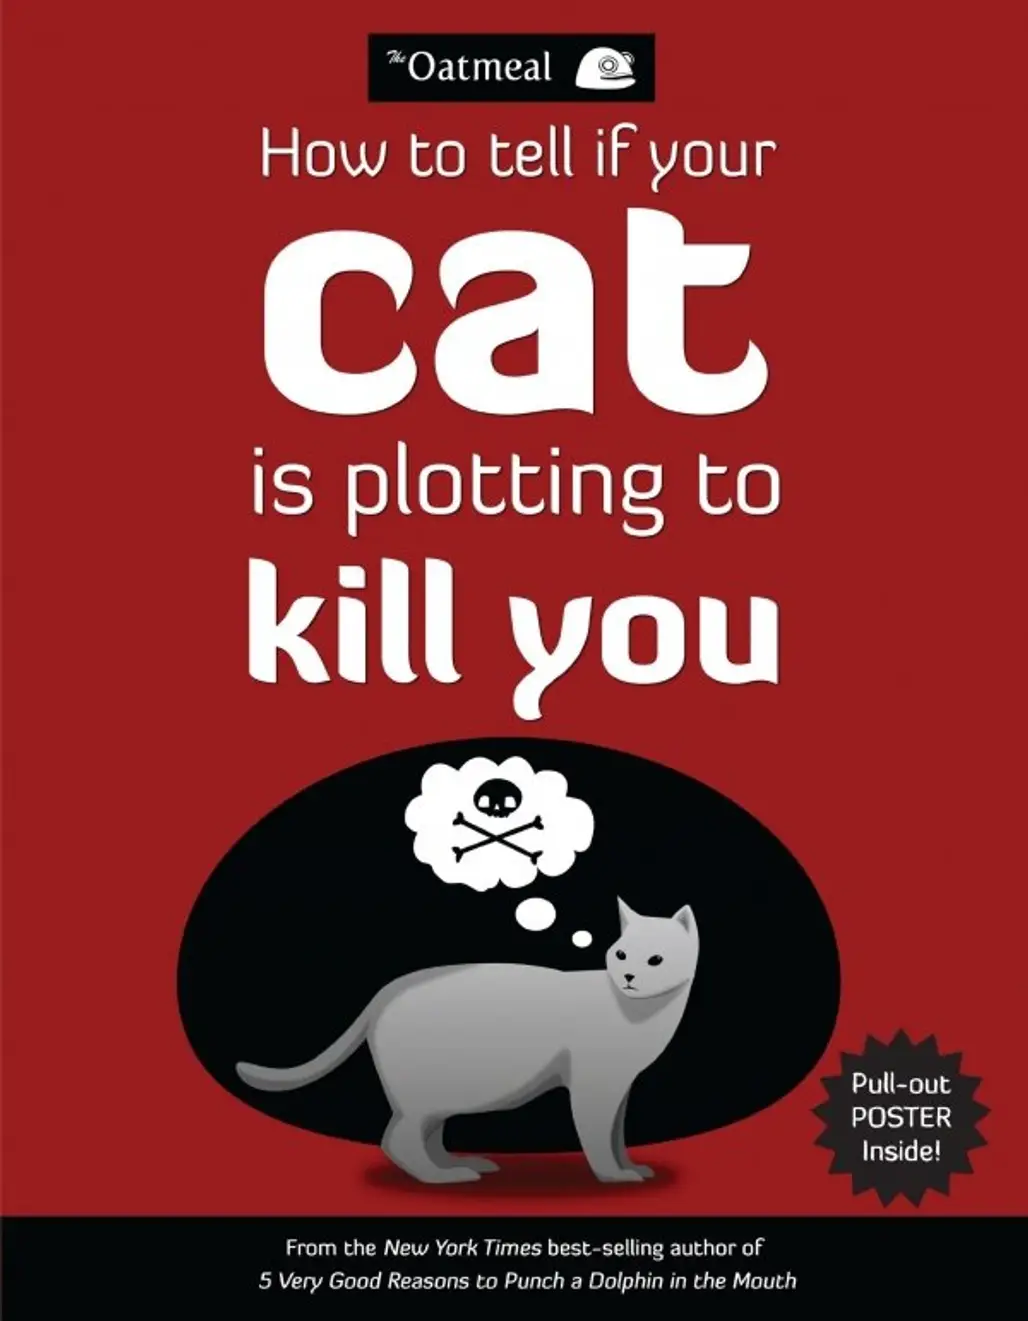 How to Tell if Your Cat is Plotting to Kill You (Matthew Inman)